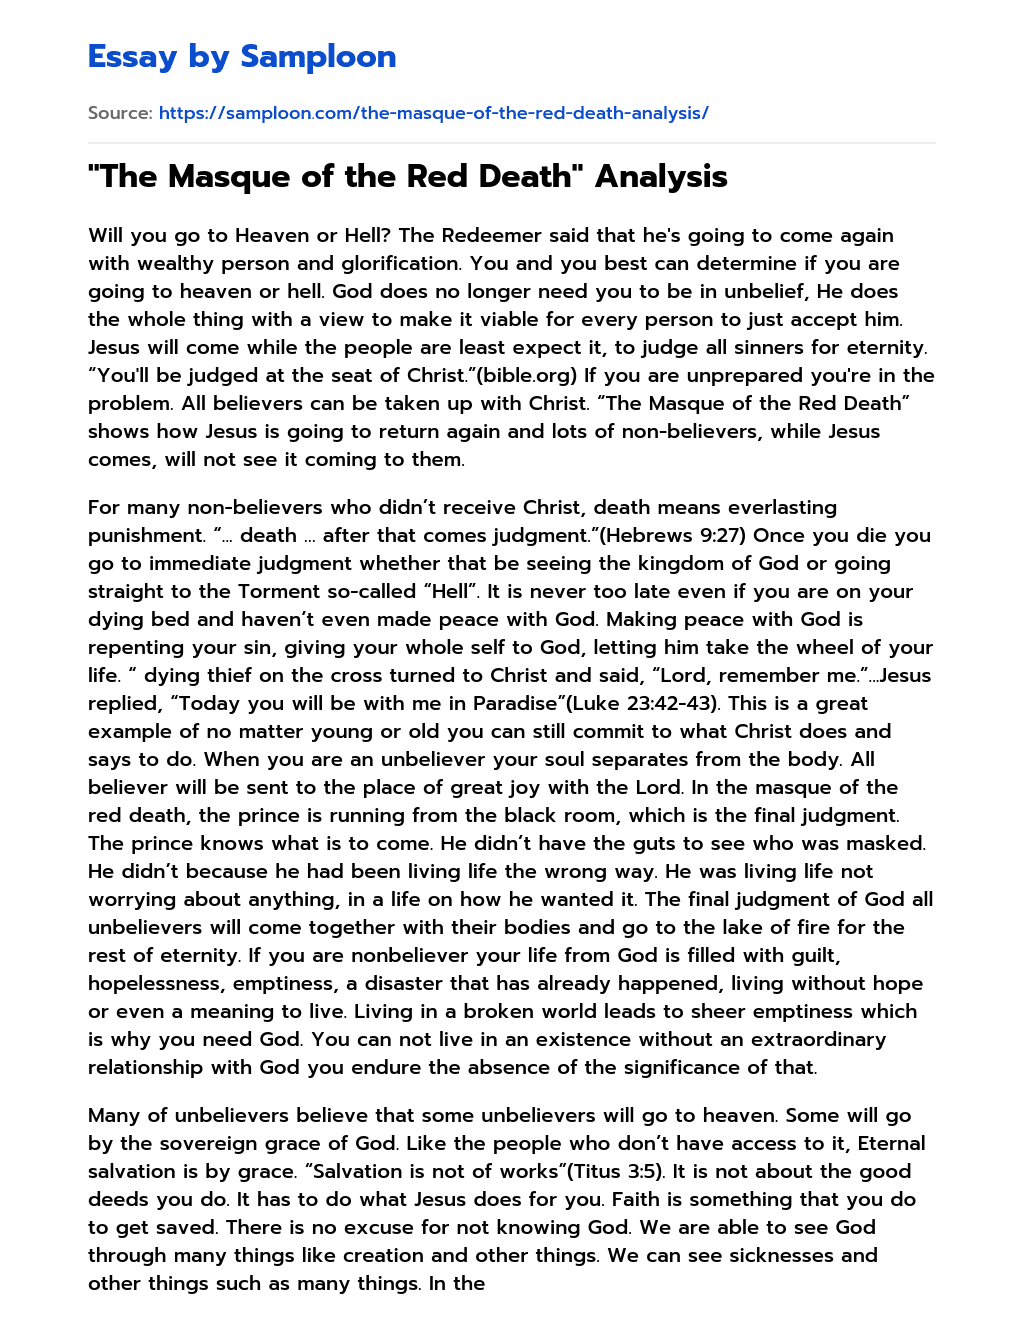 “The Masque of the Red Death” Analysis essay